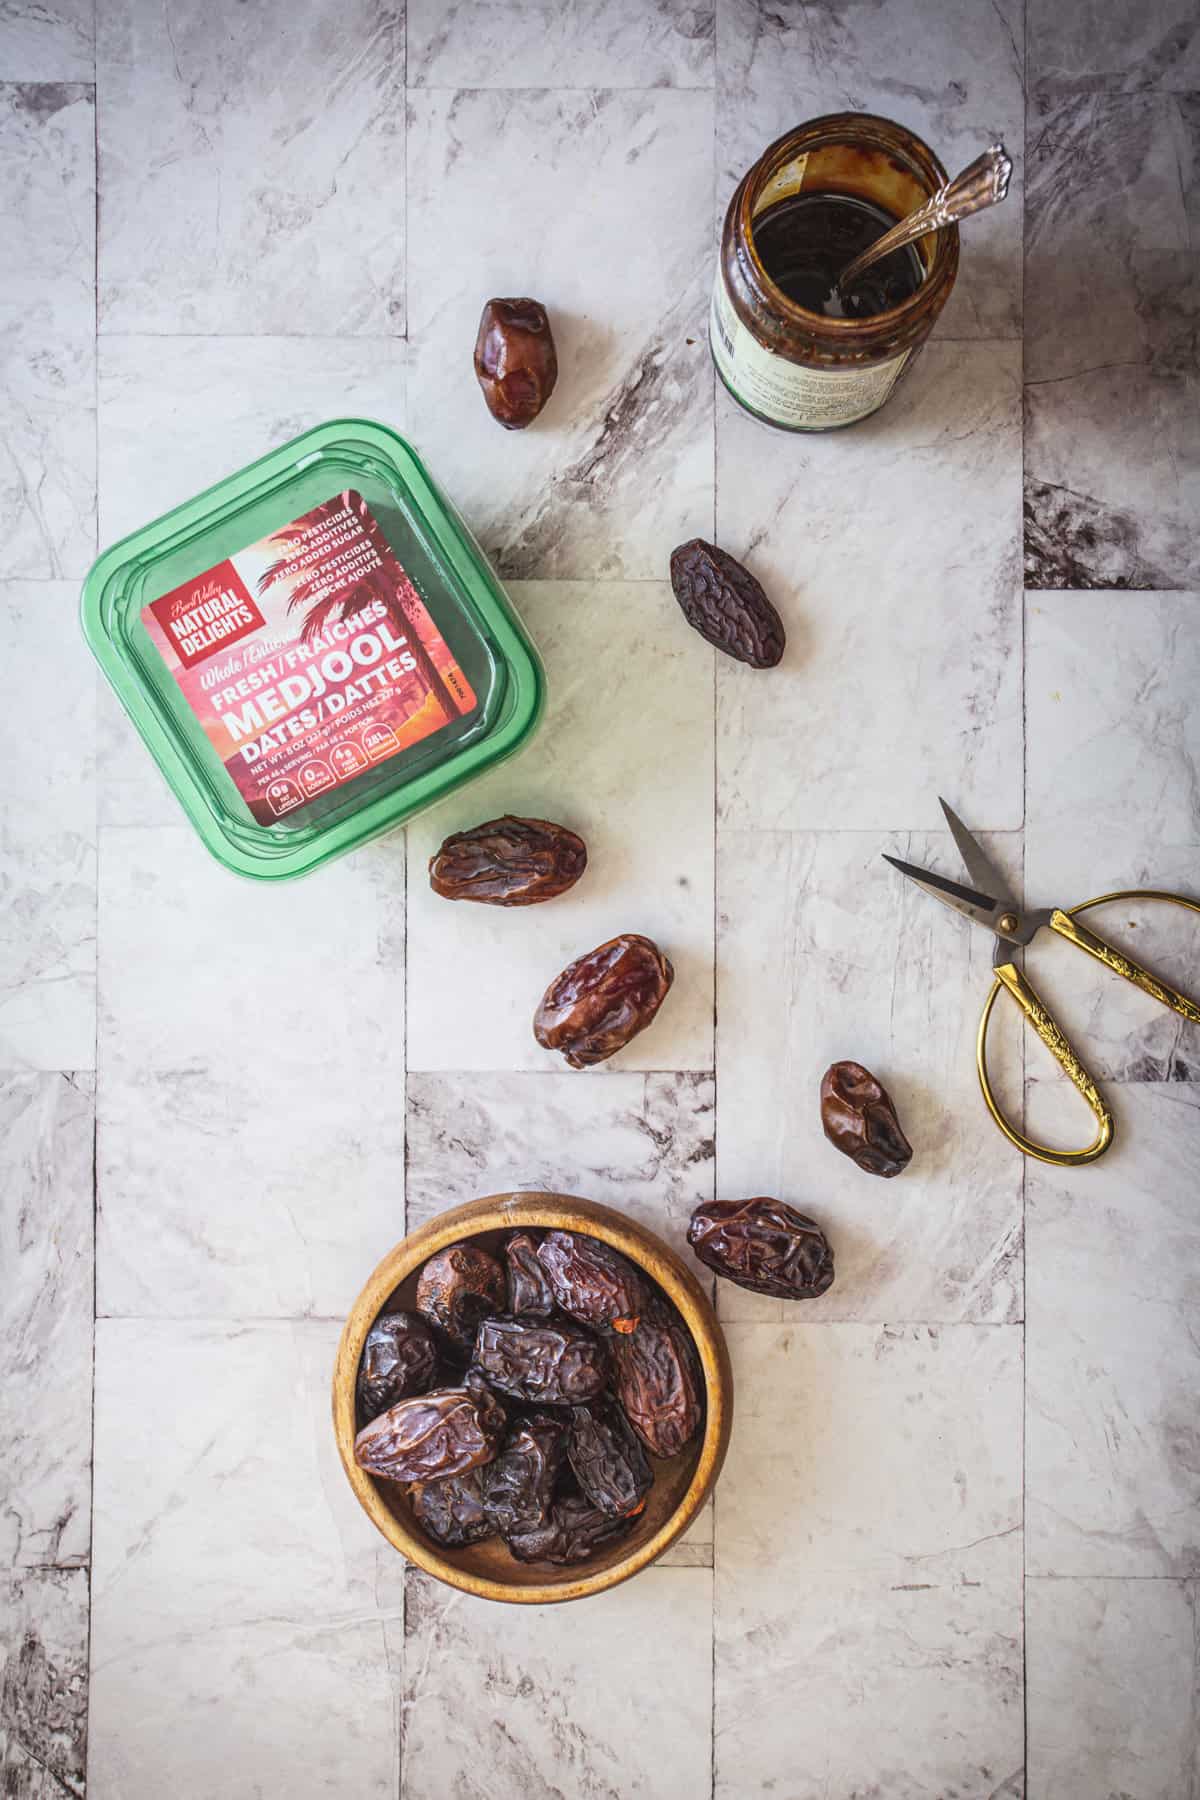 Natural Delights Medjool Dates box and bowl with date molasses